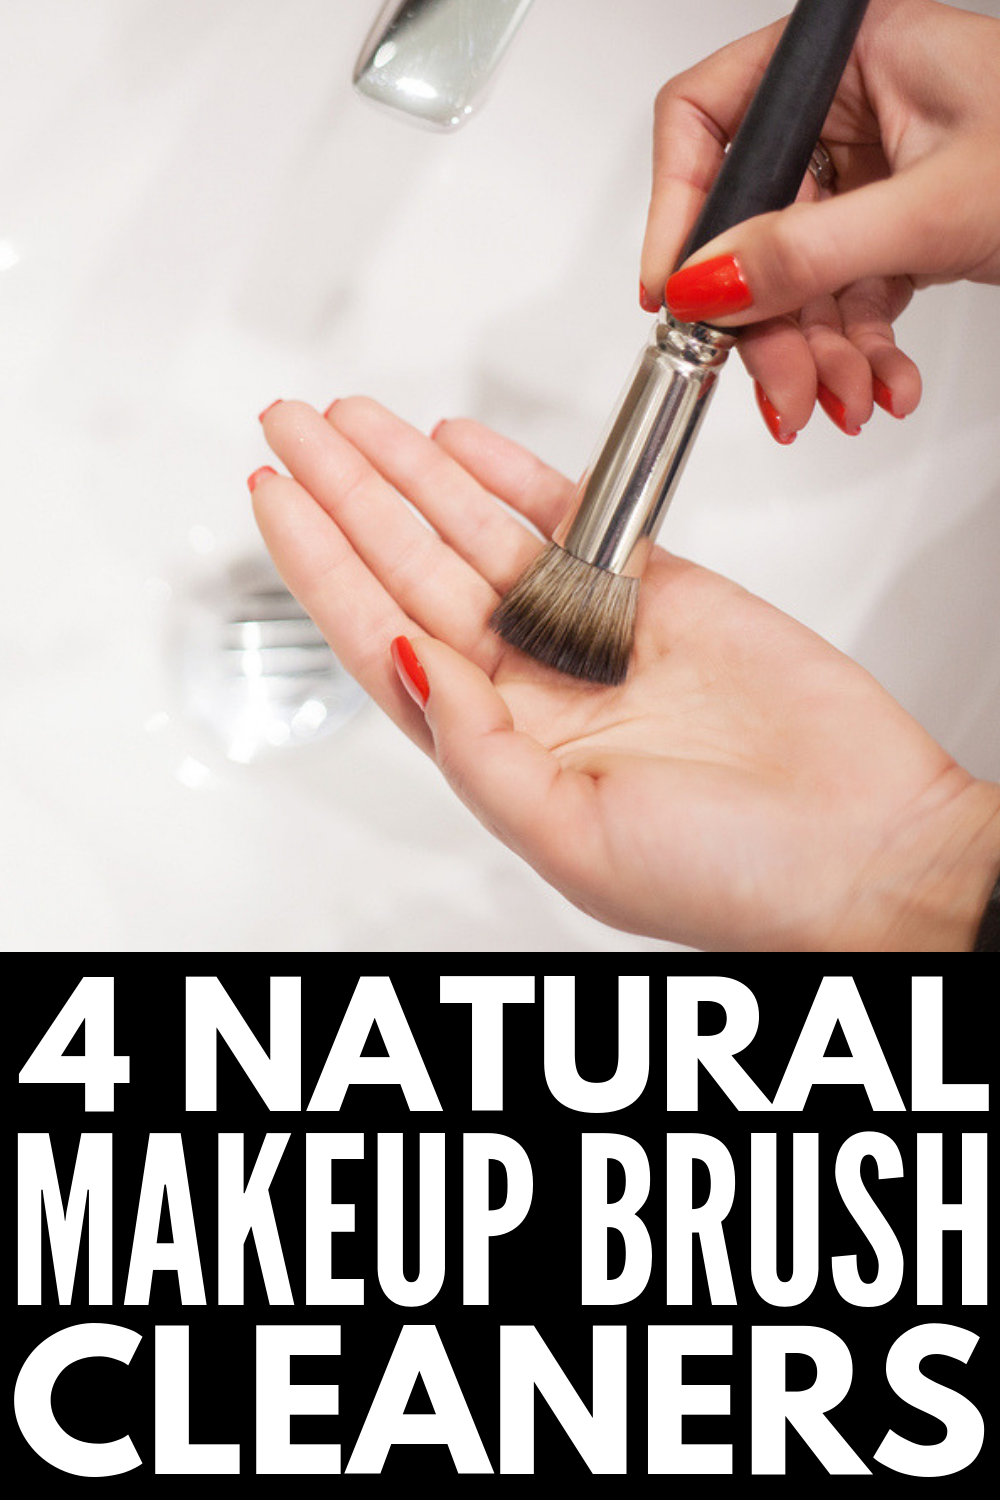 How to Clean Makeup Brushes The Right Way: 14 Tips and Tricks -   13 makeup Easy baby shampoo ideas